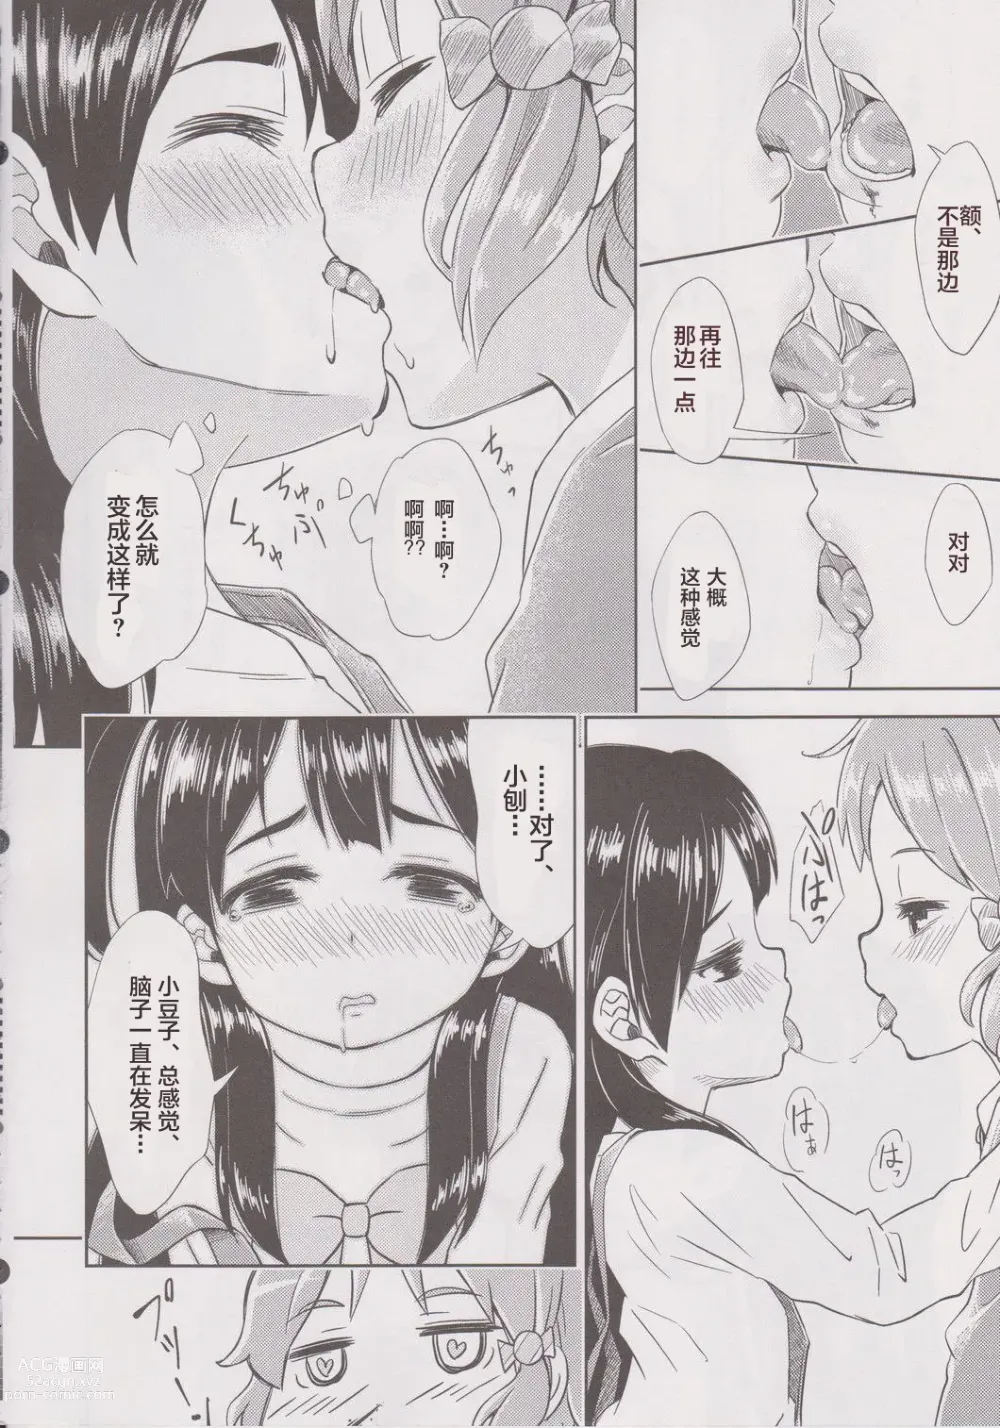 Page 11 of doujinshi Lovely Girls Lily vol. 6